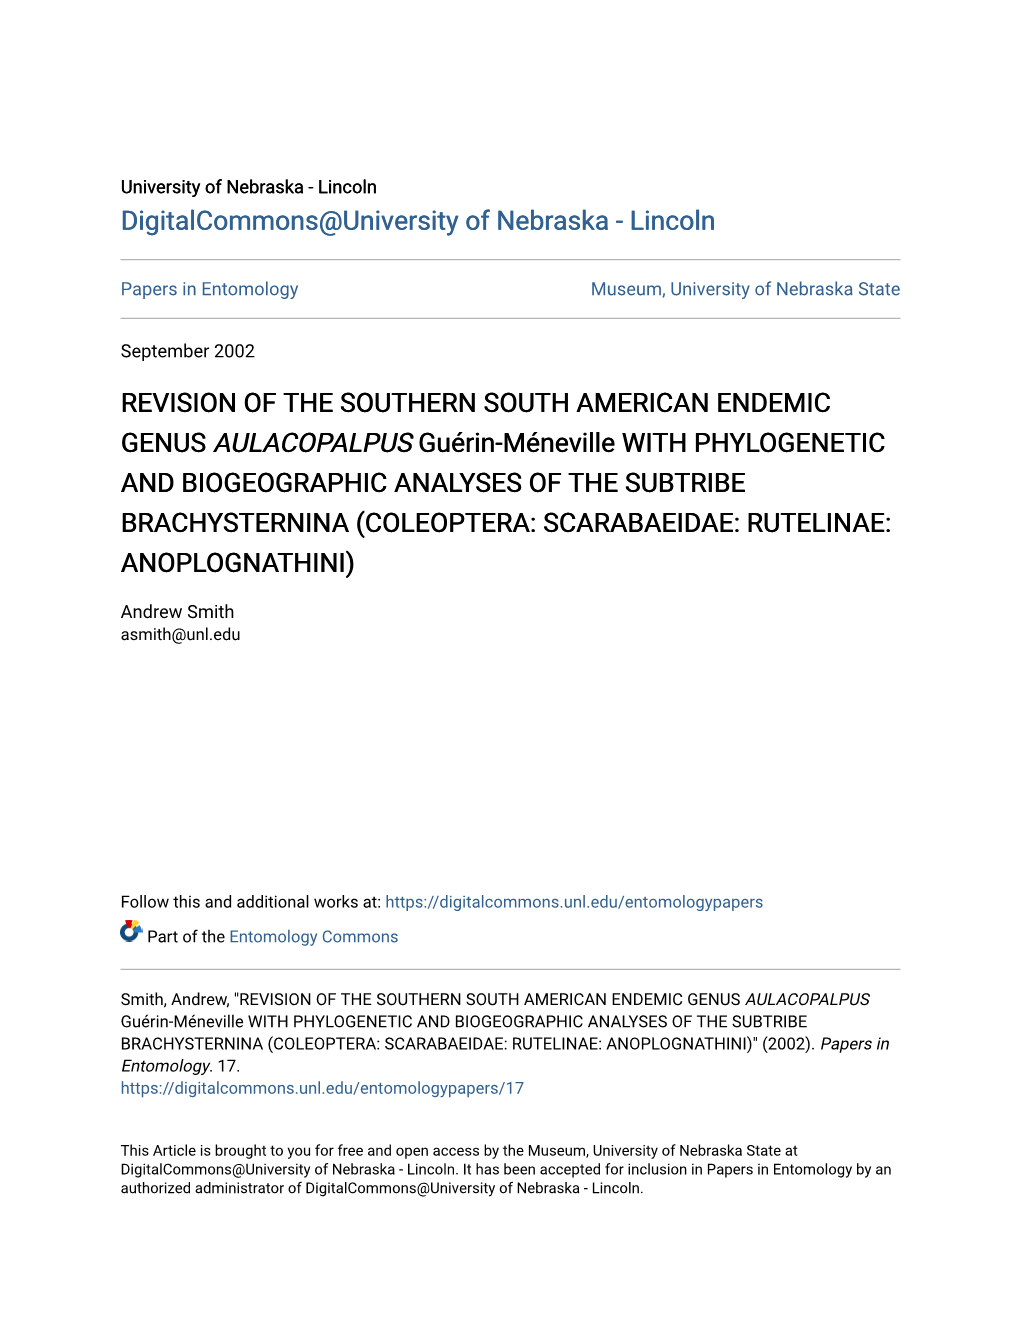 Revision of the Southern South American Endemic